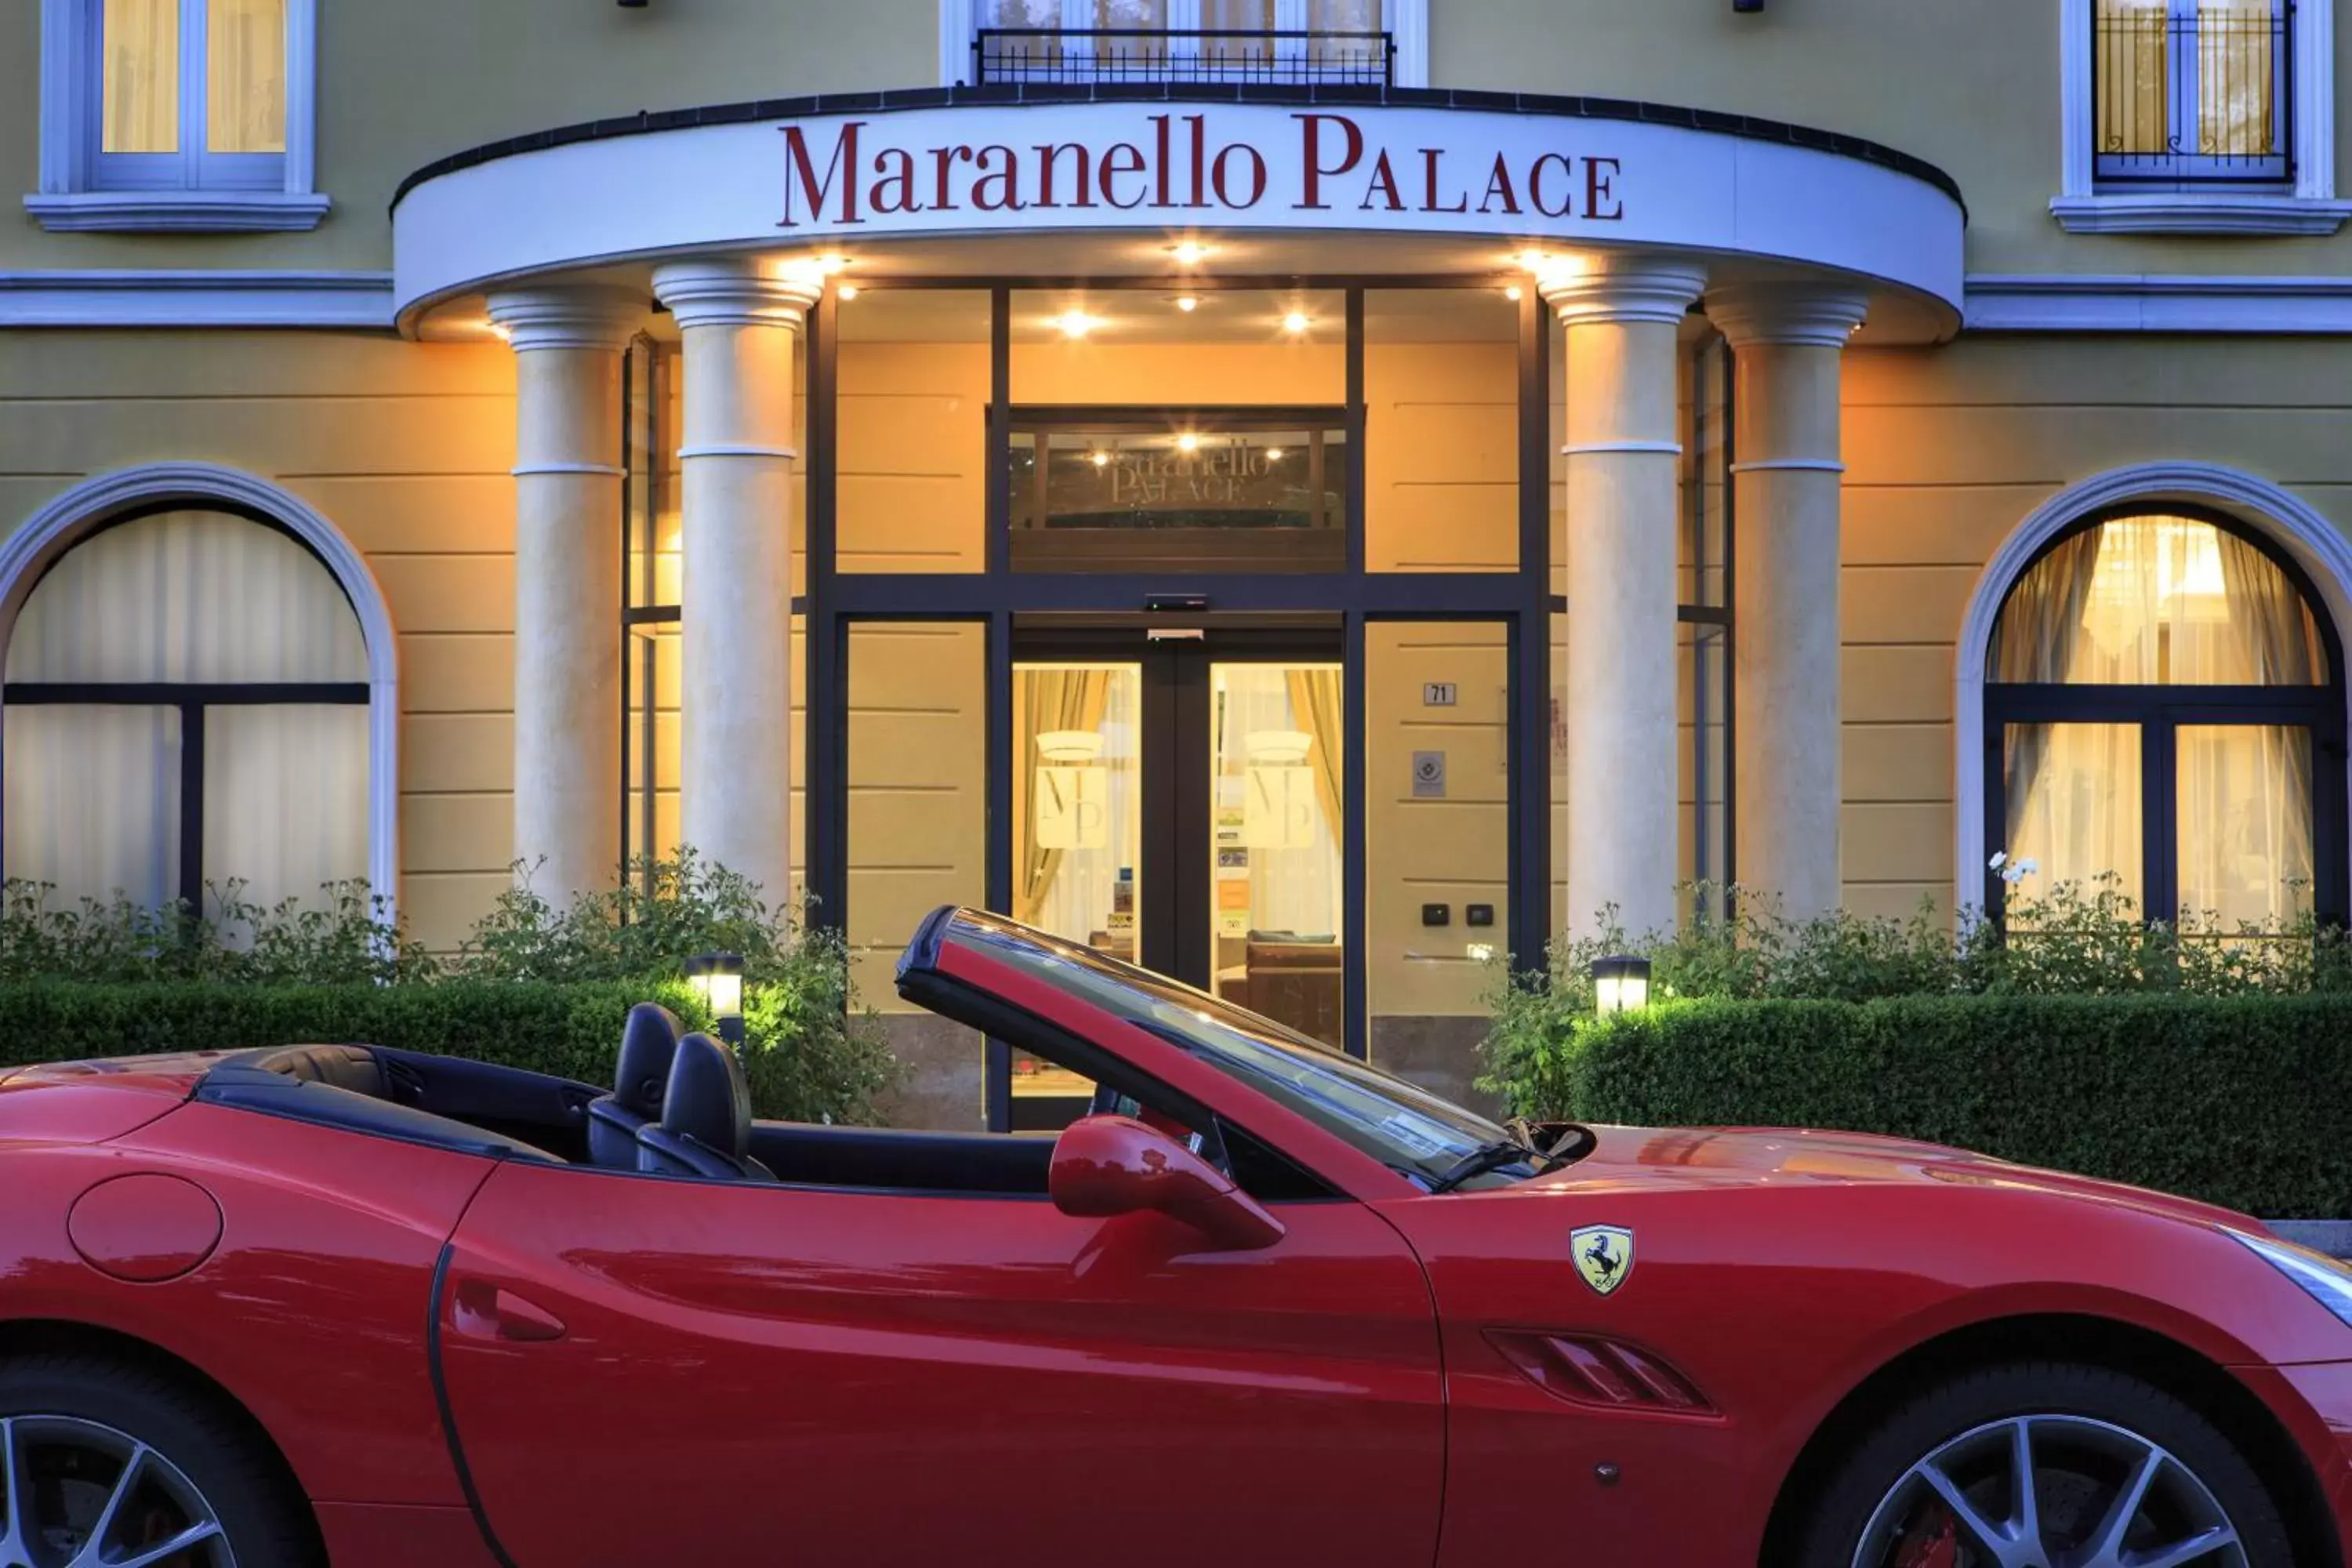 Property logo or sign in Maranello Palace